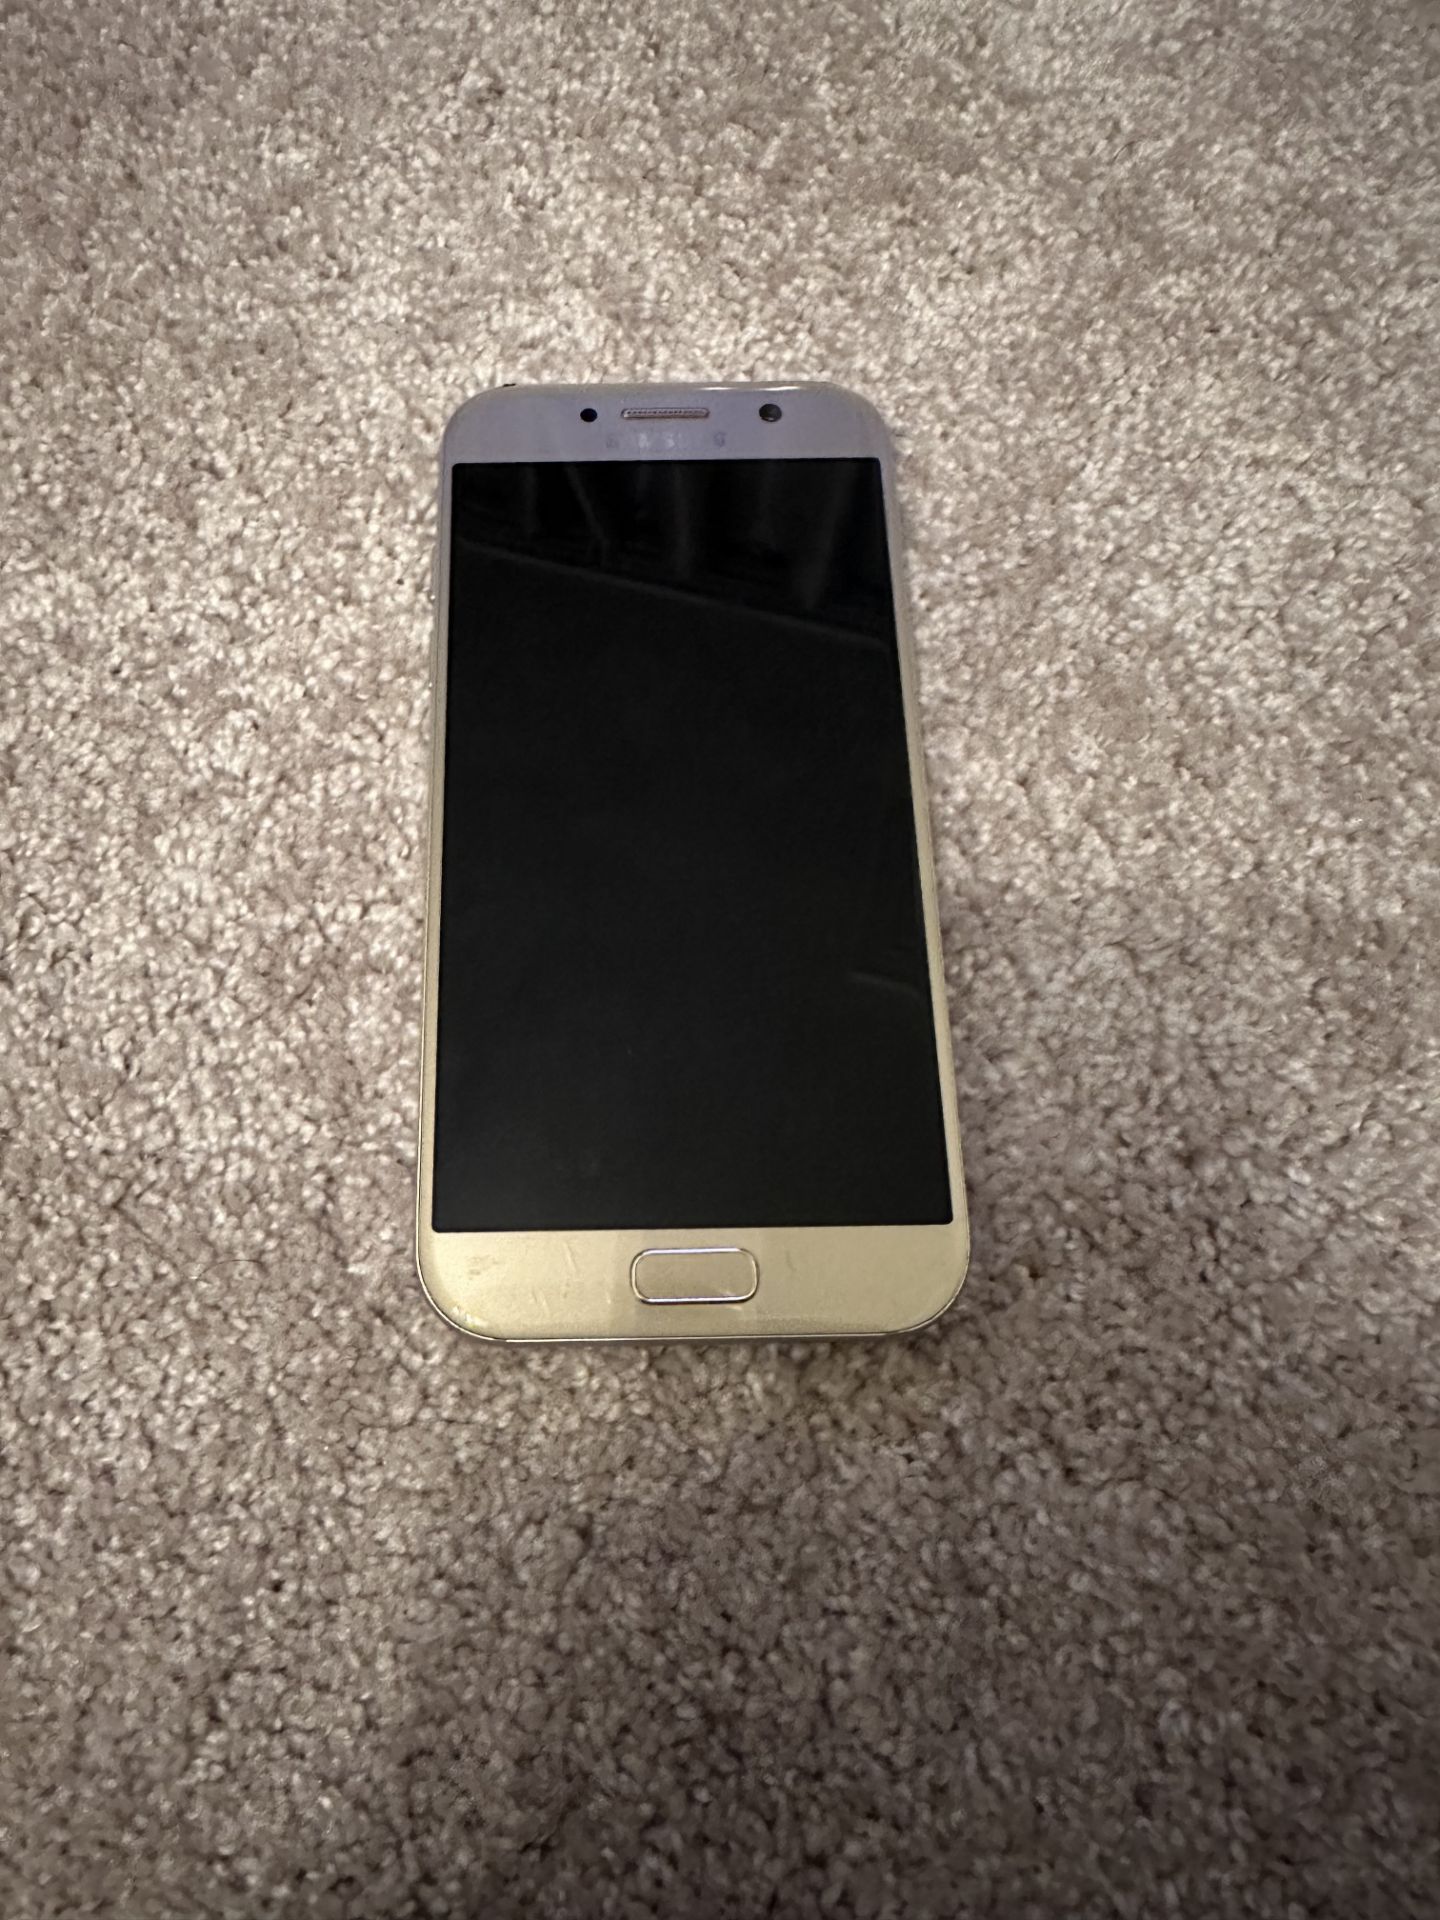 Samsung A5 Gold - Untested